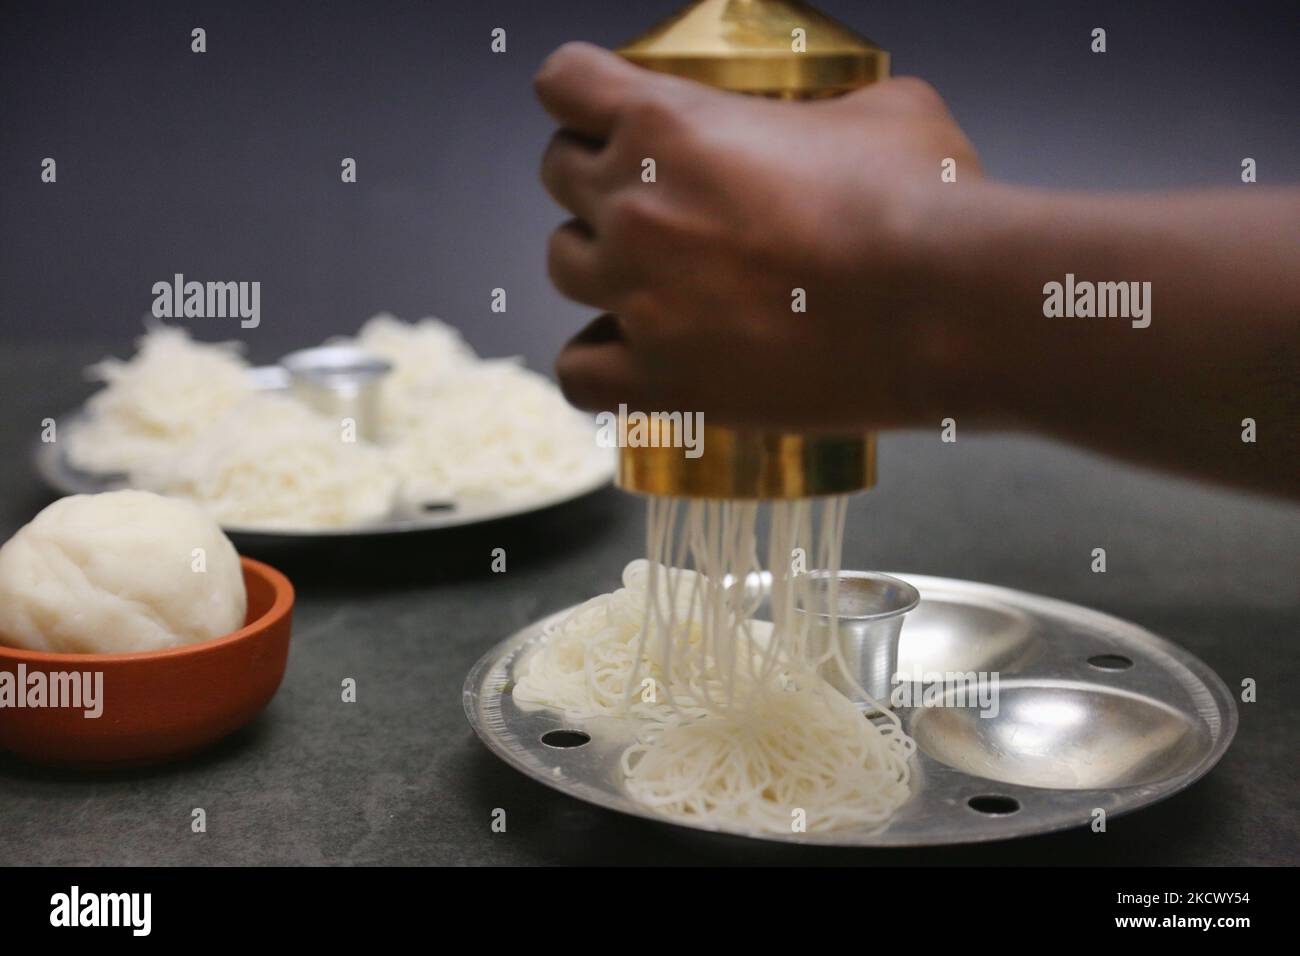 https://c8.alamy.com/comp/2KCWY54/woman-preparing-idiyappam-in-toronto-ontario-canada-on-november-28-2021-idiyappam-also-known-as-string-hoppers-is-a-rice-dish-originating-from-the-indian-states-of-tamil-nadu-and-kerala-it-consists-of-rice-flour-pressed-into-noodles-woven-into-a-flat-disc-like-shape-and-steamed-photo-by-creative-touch-imaging-ltdnurphoto-2KCWY54.jpg